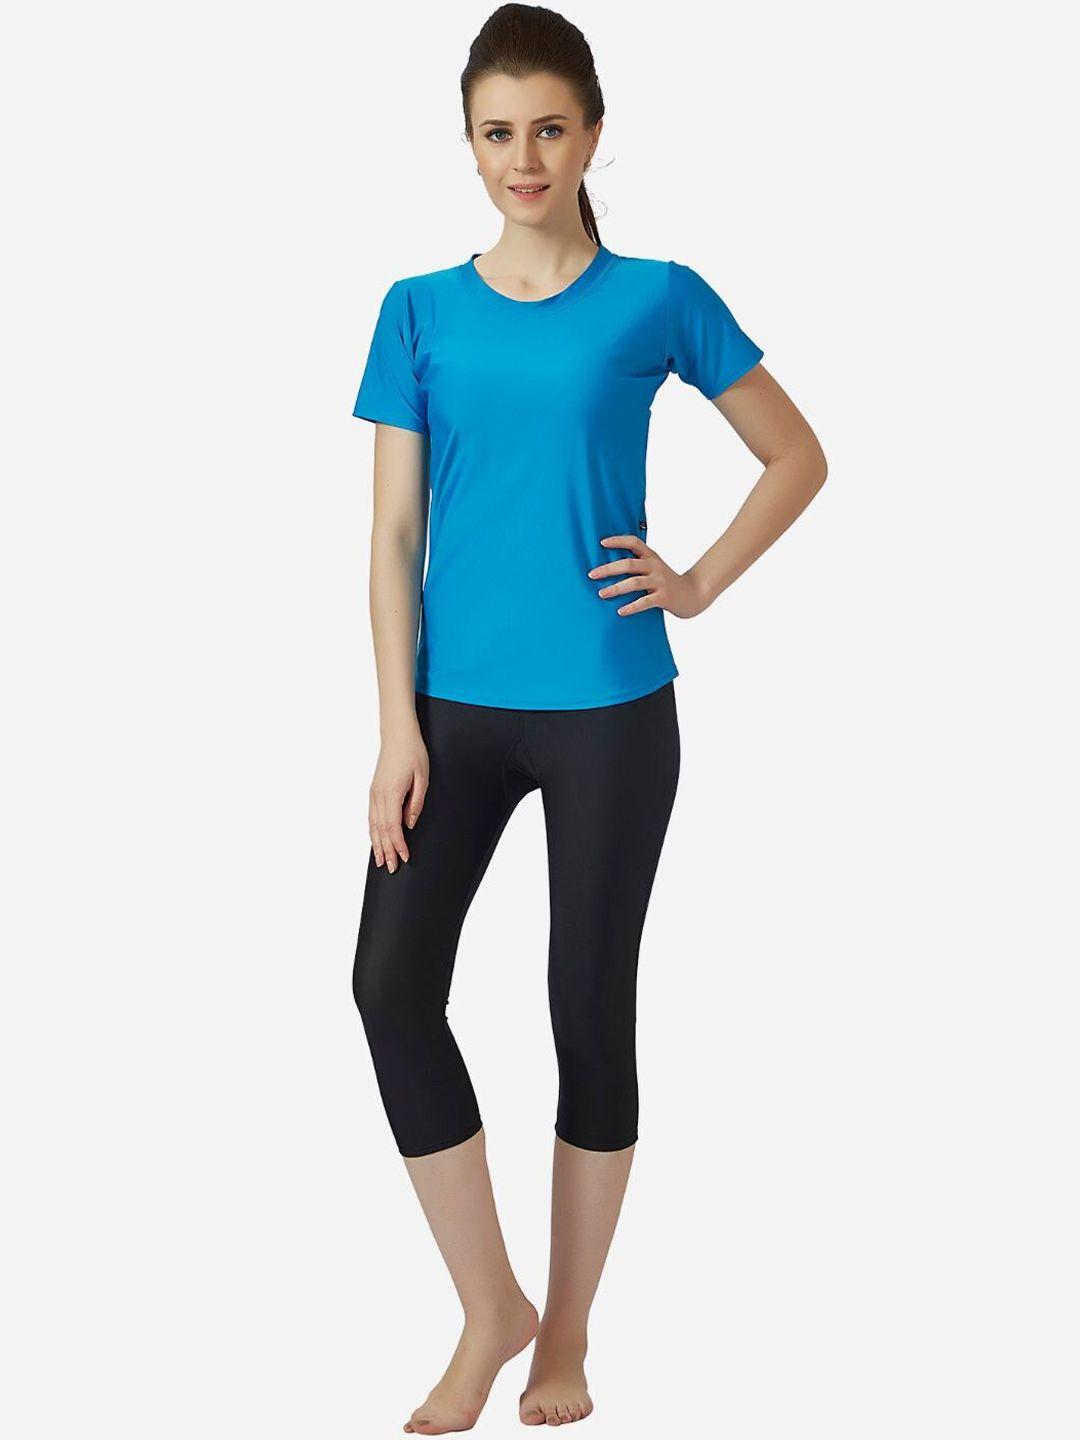 veloz women swimming top with tights